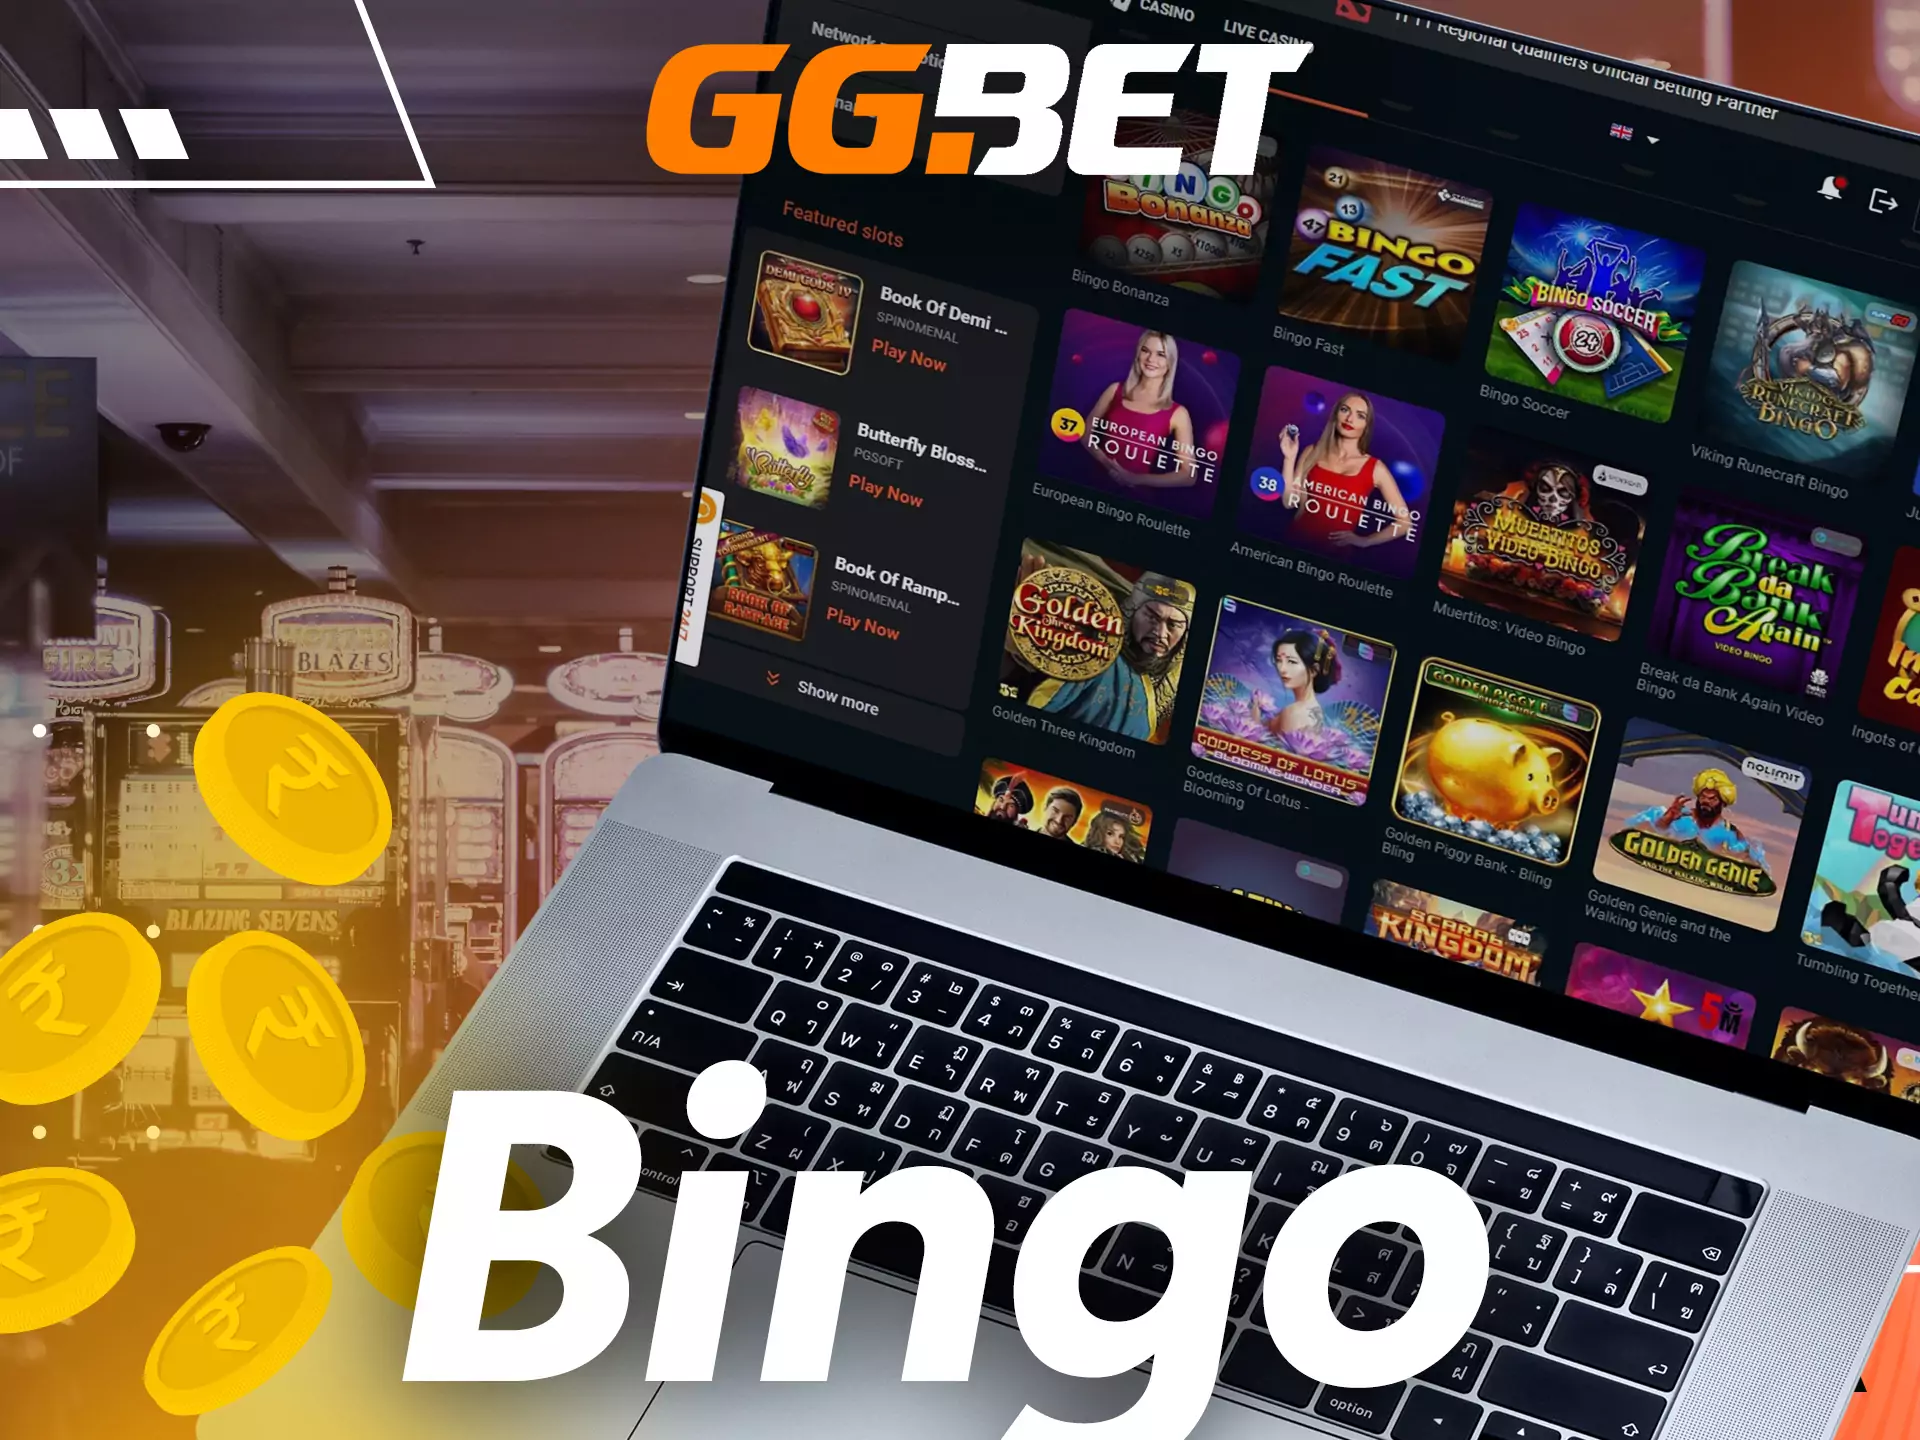 In the GGBet casino, you can play bingo games as well.